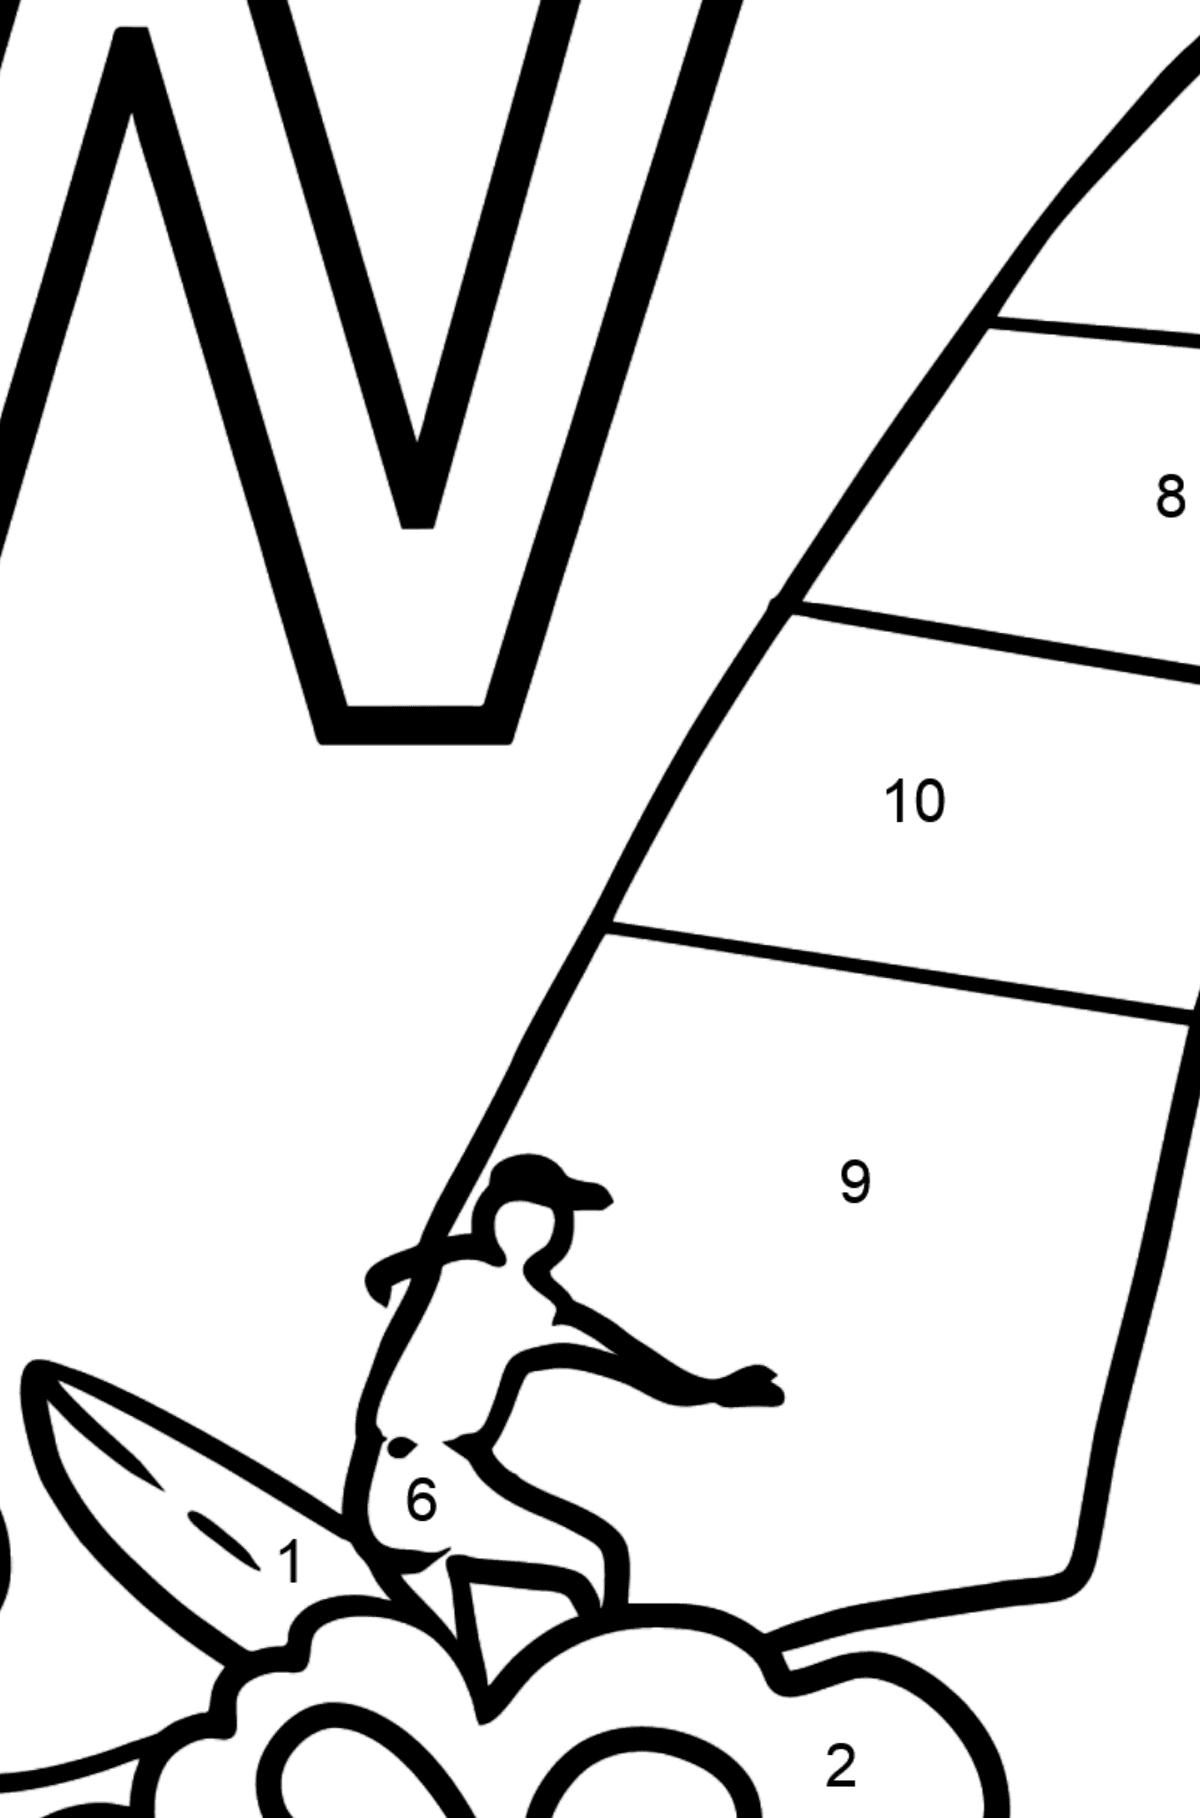 Portuguese Letter W coloring pages - WINDSURF - Coloring by Numbers for Kids